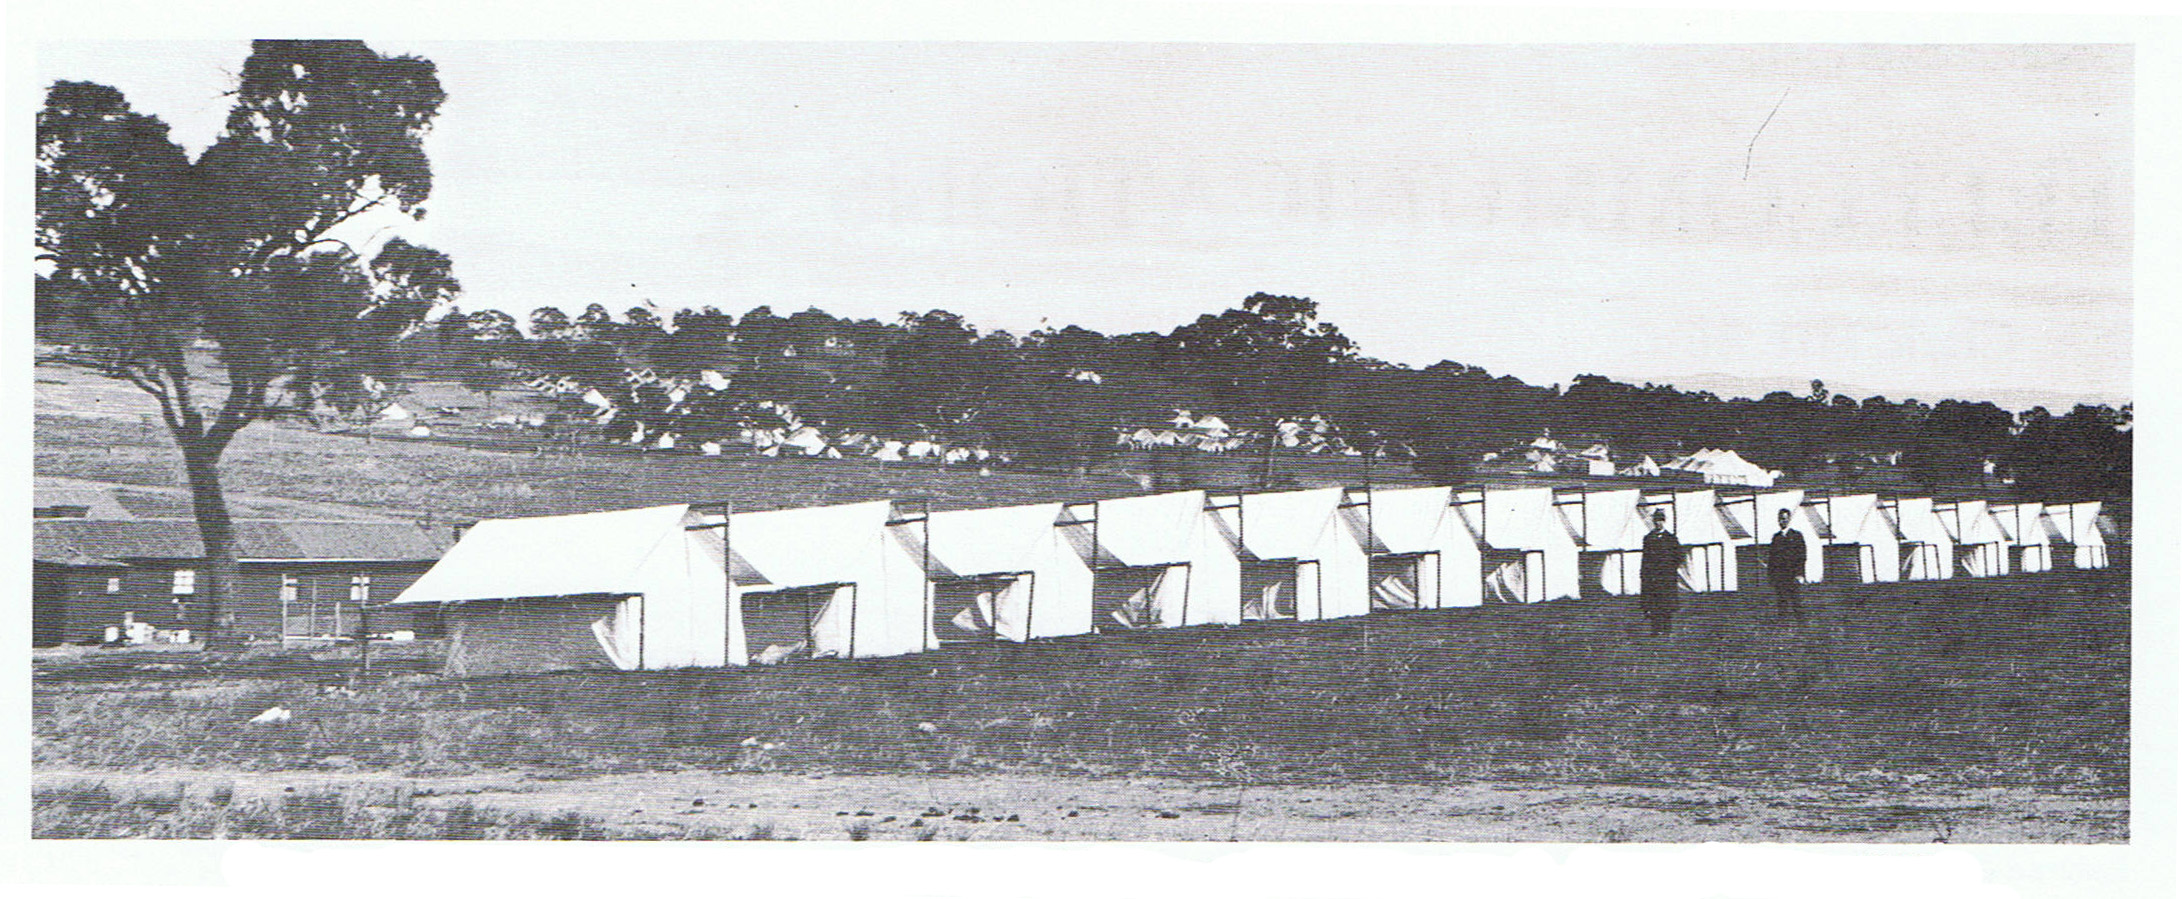 Tents for telegraphists